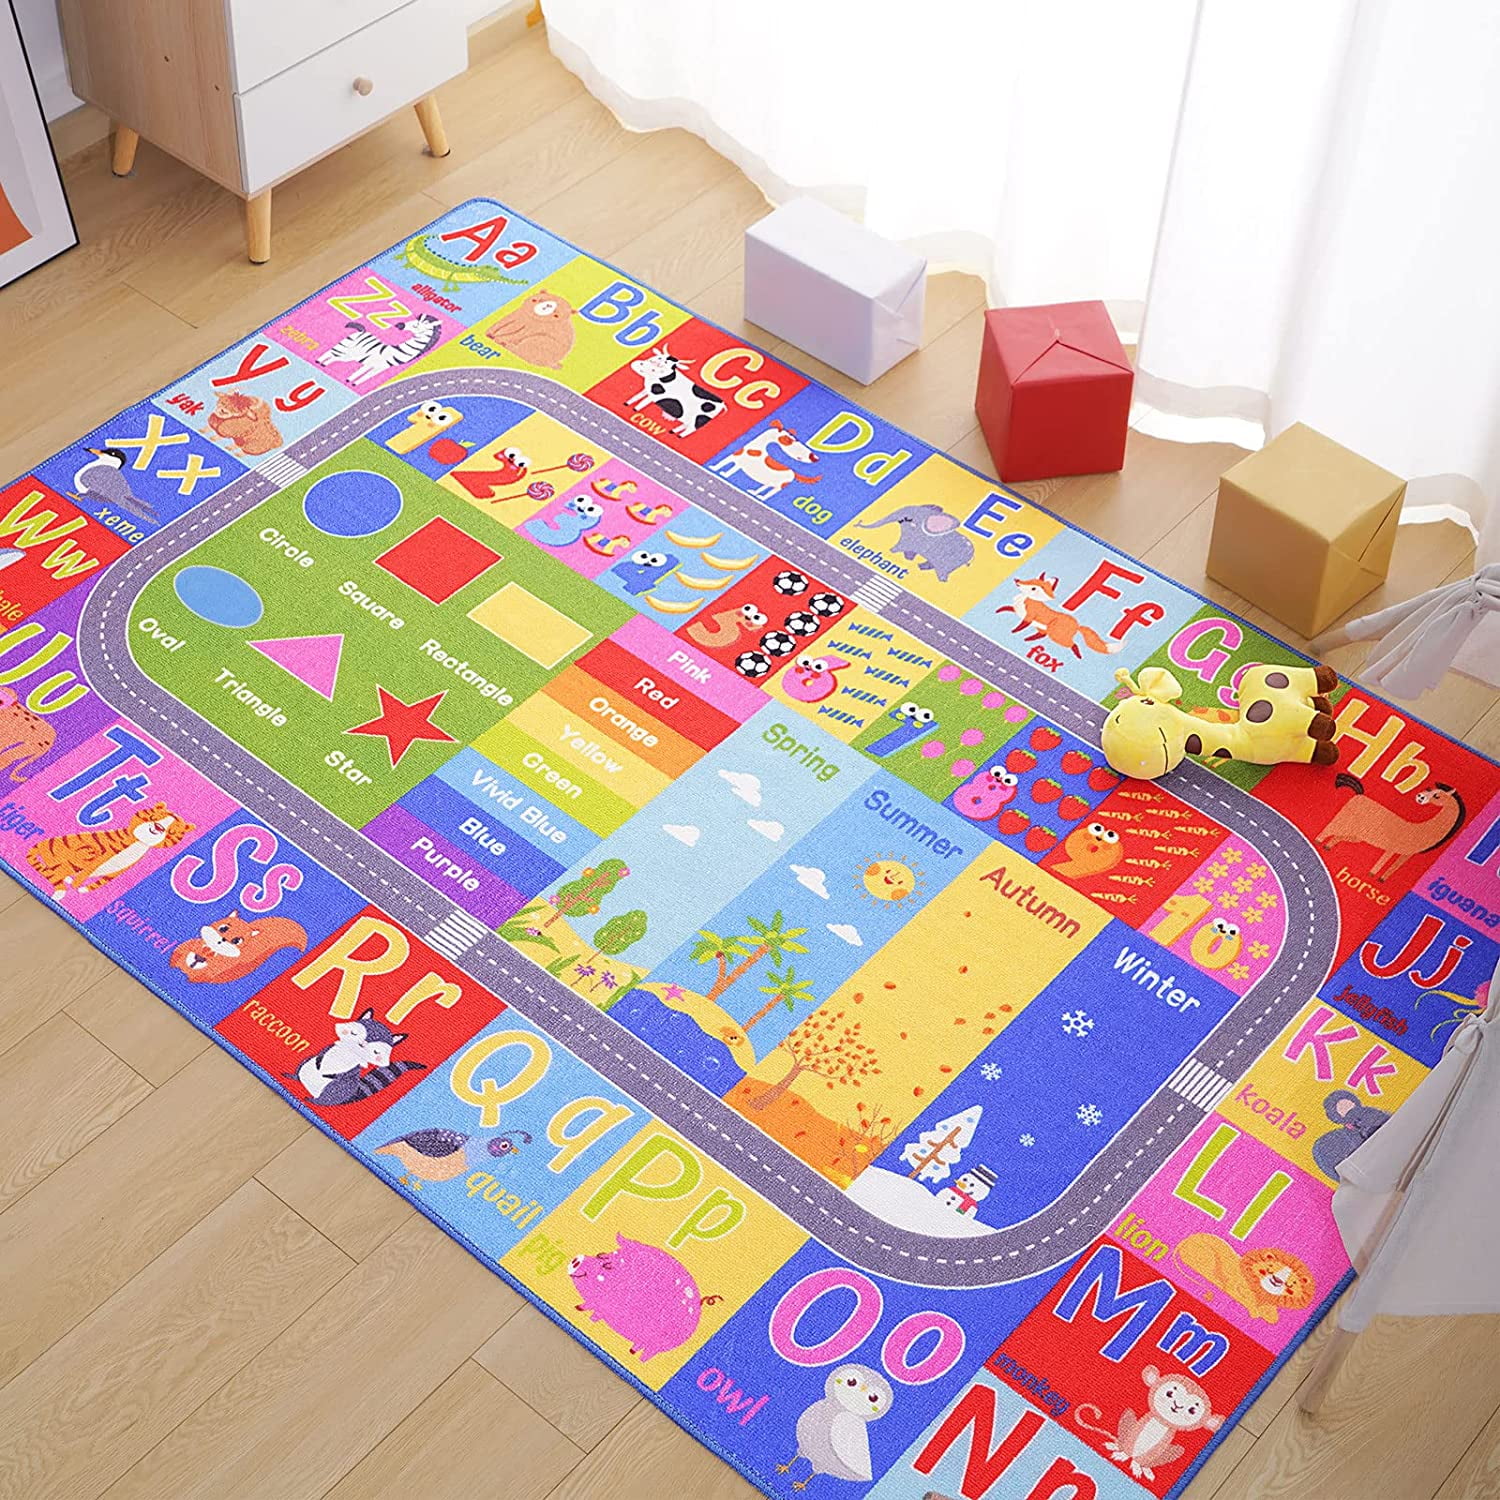 Shapes AROGAN Kids Play Mat 4x6 Feet Animals Pattern Children Learn and Educational Rugs Non Slip Play Rug for Nursery Bederoom Play Room Playmat Rug with Numbers 